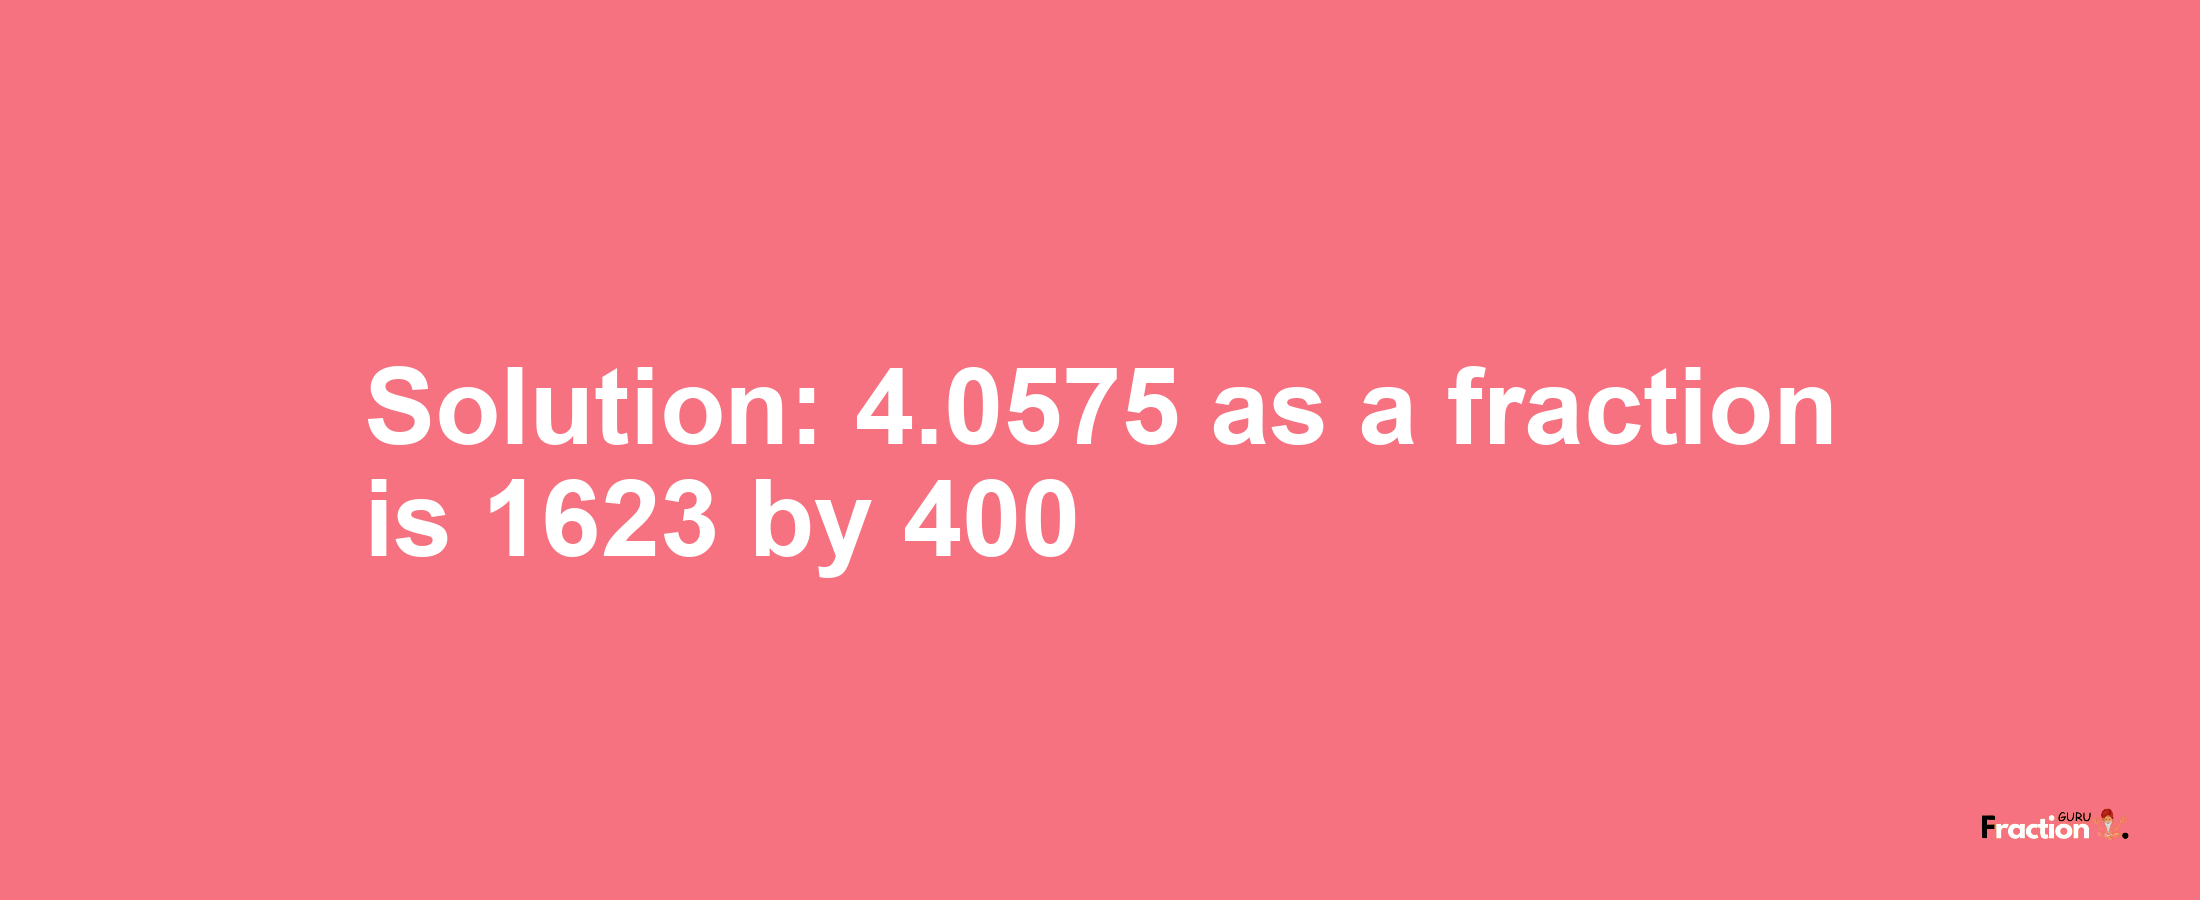 Solution:4.0575 as a fraction is 1623/400